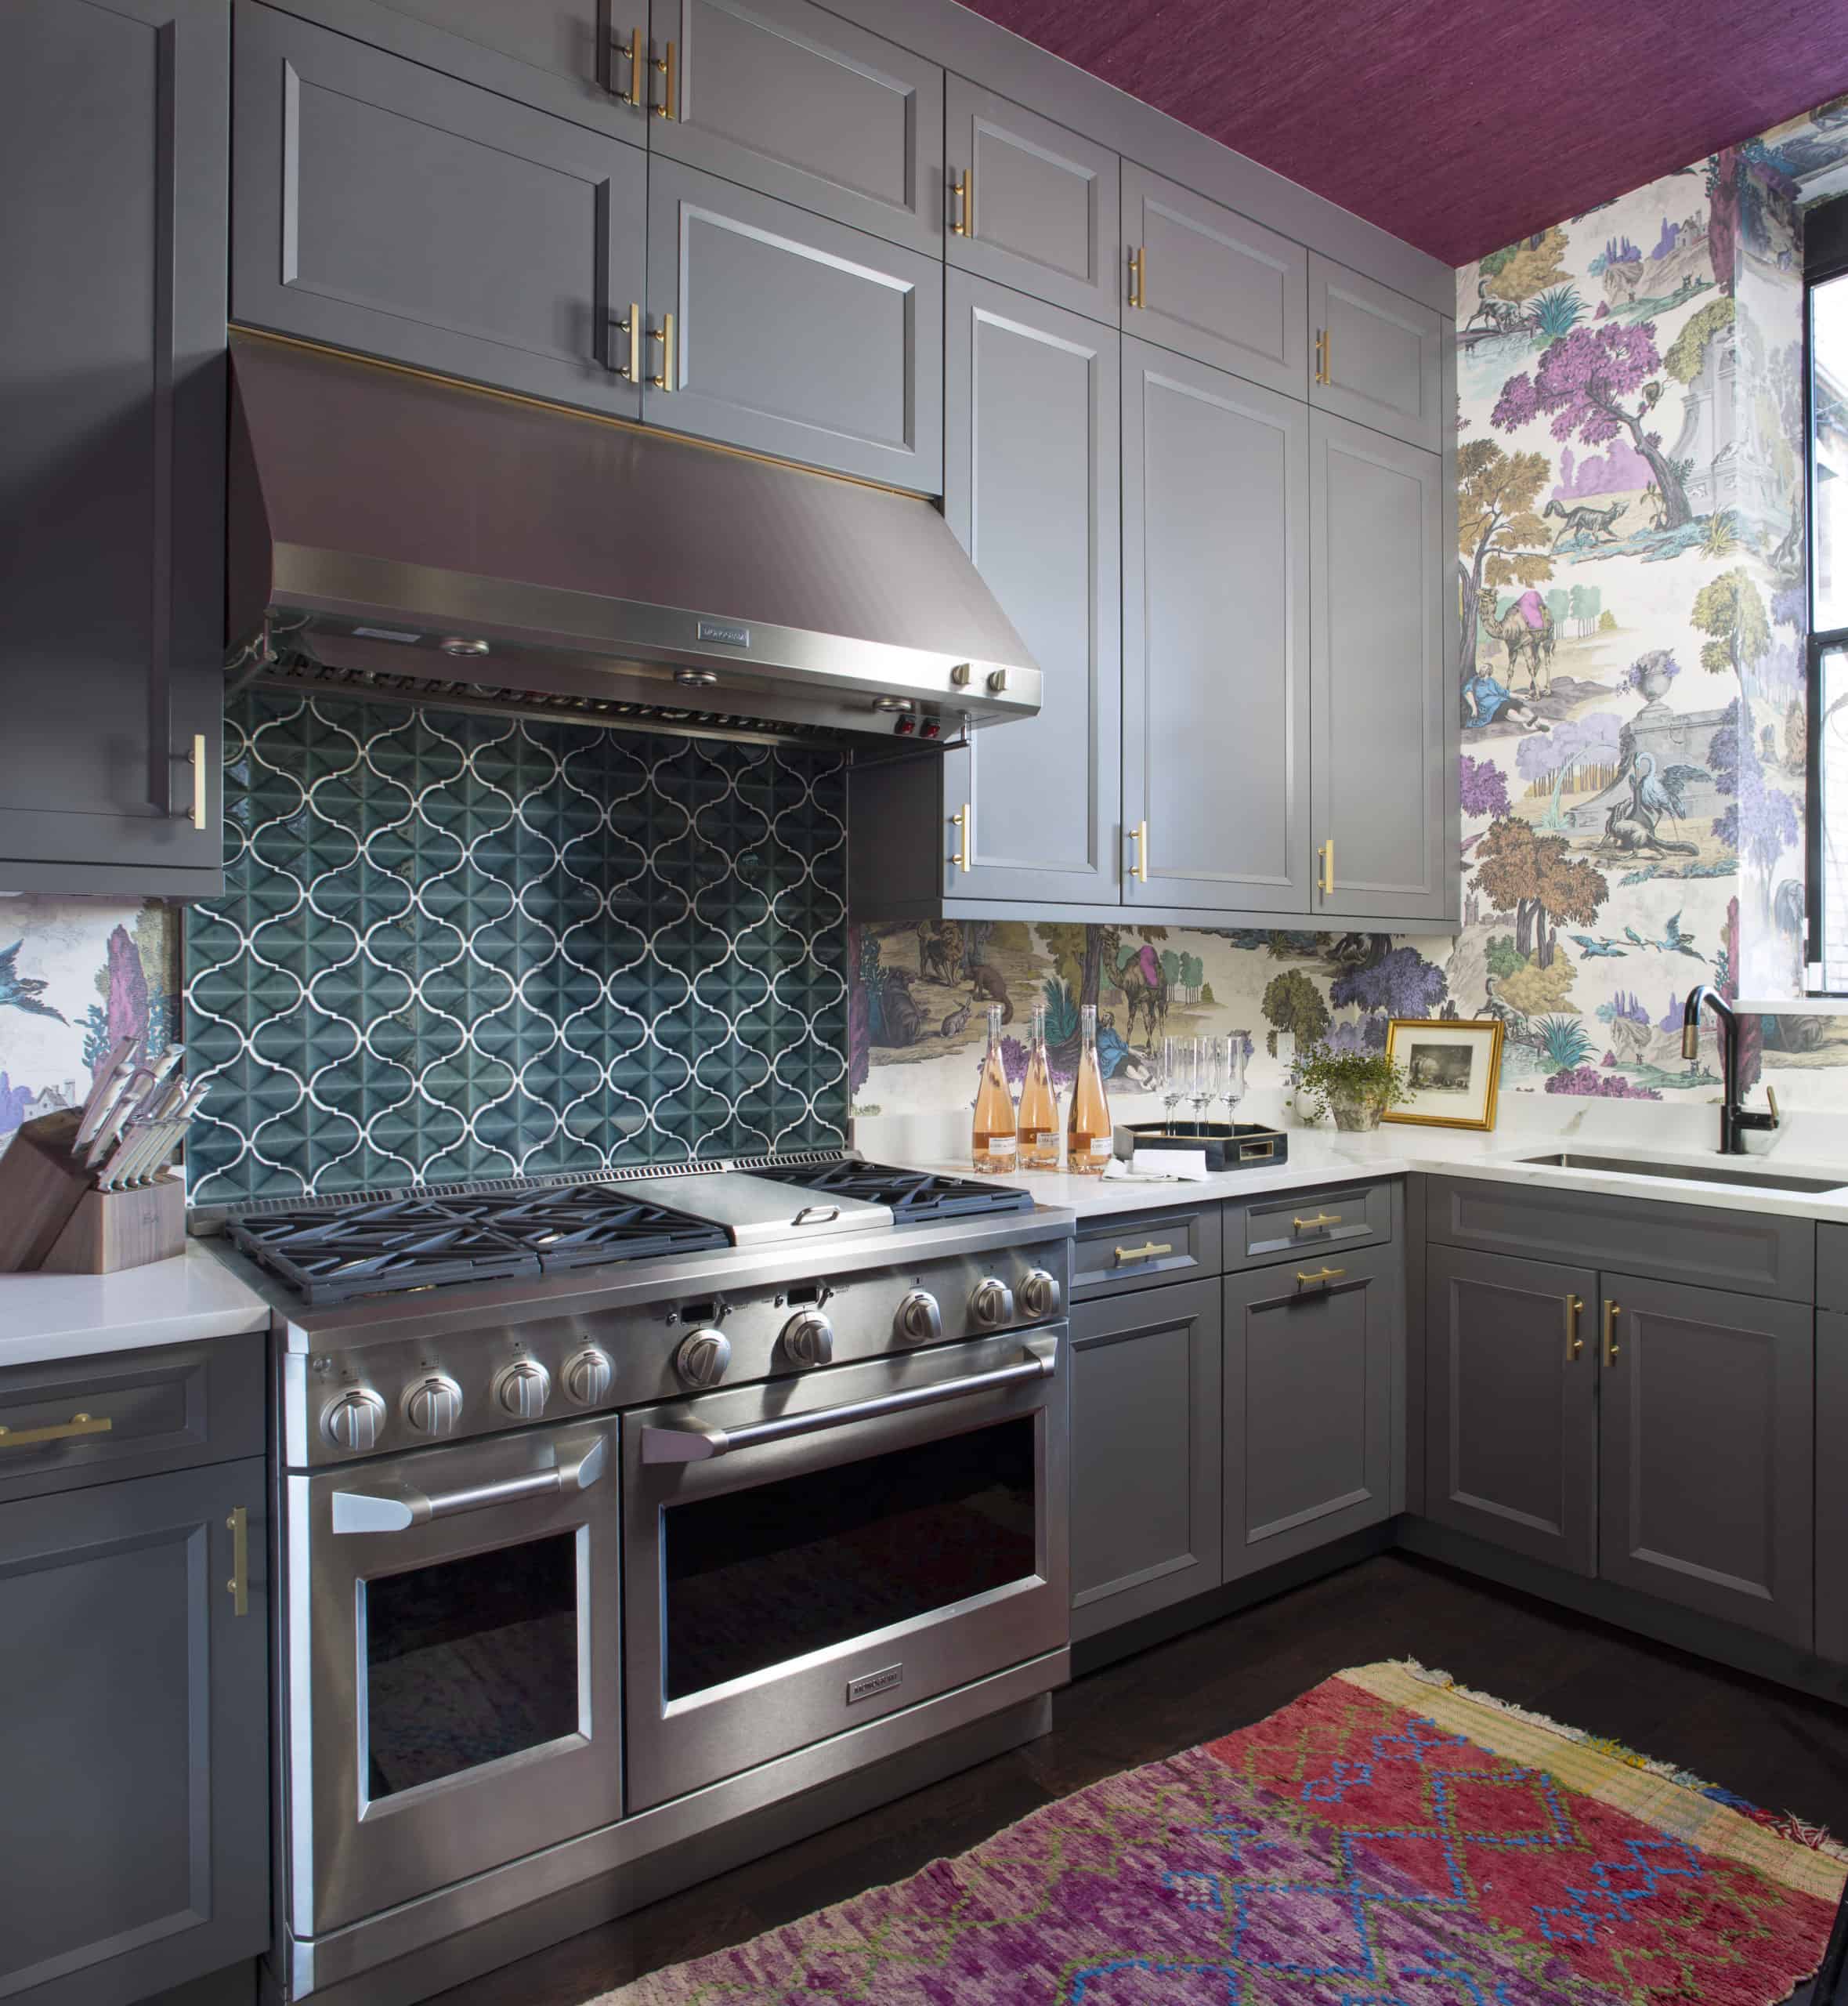 Stunning colorful kitchen finishes and high end appliances